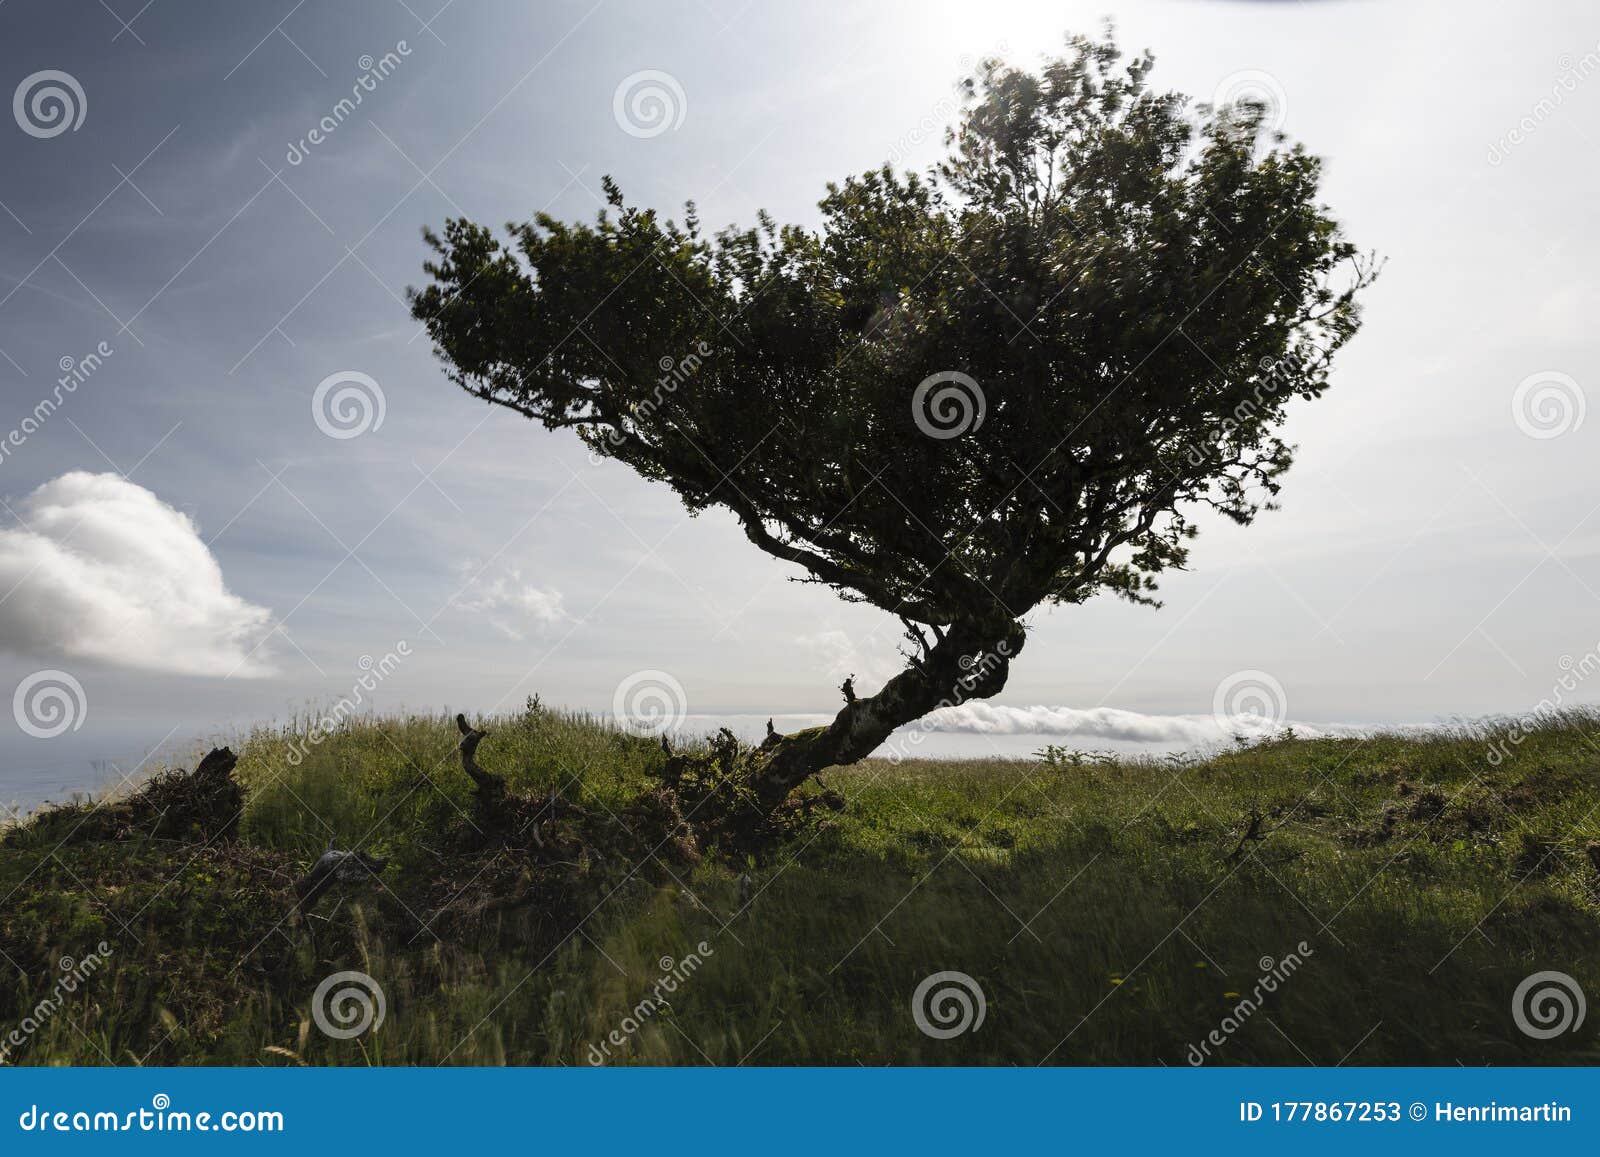 silhouette of azores heather erica azorica tree in the sunlight and wind, azores